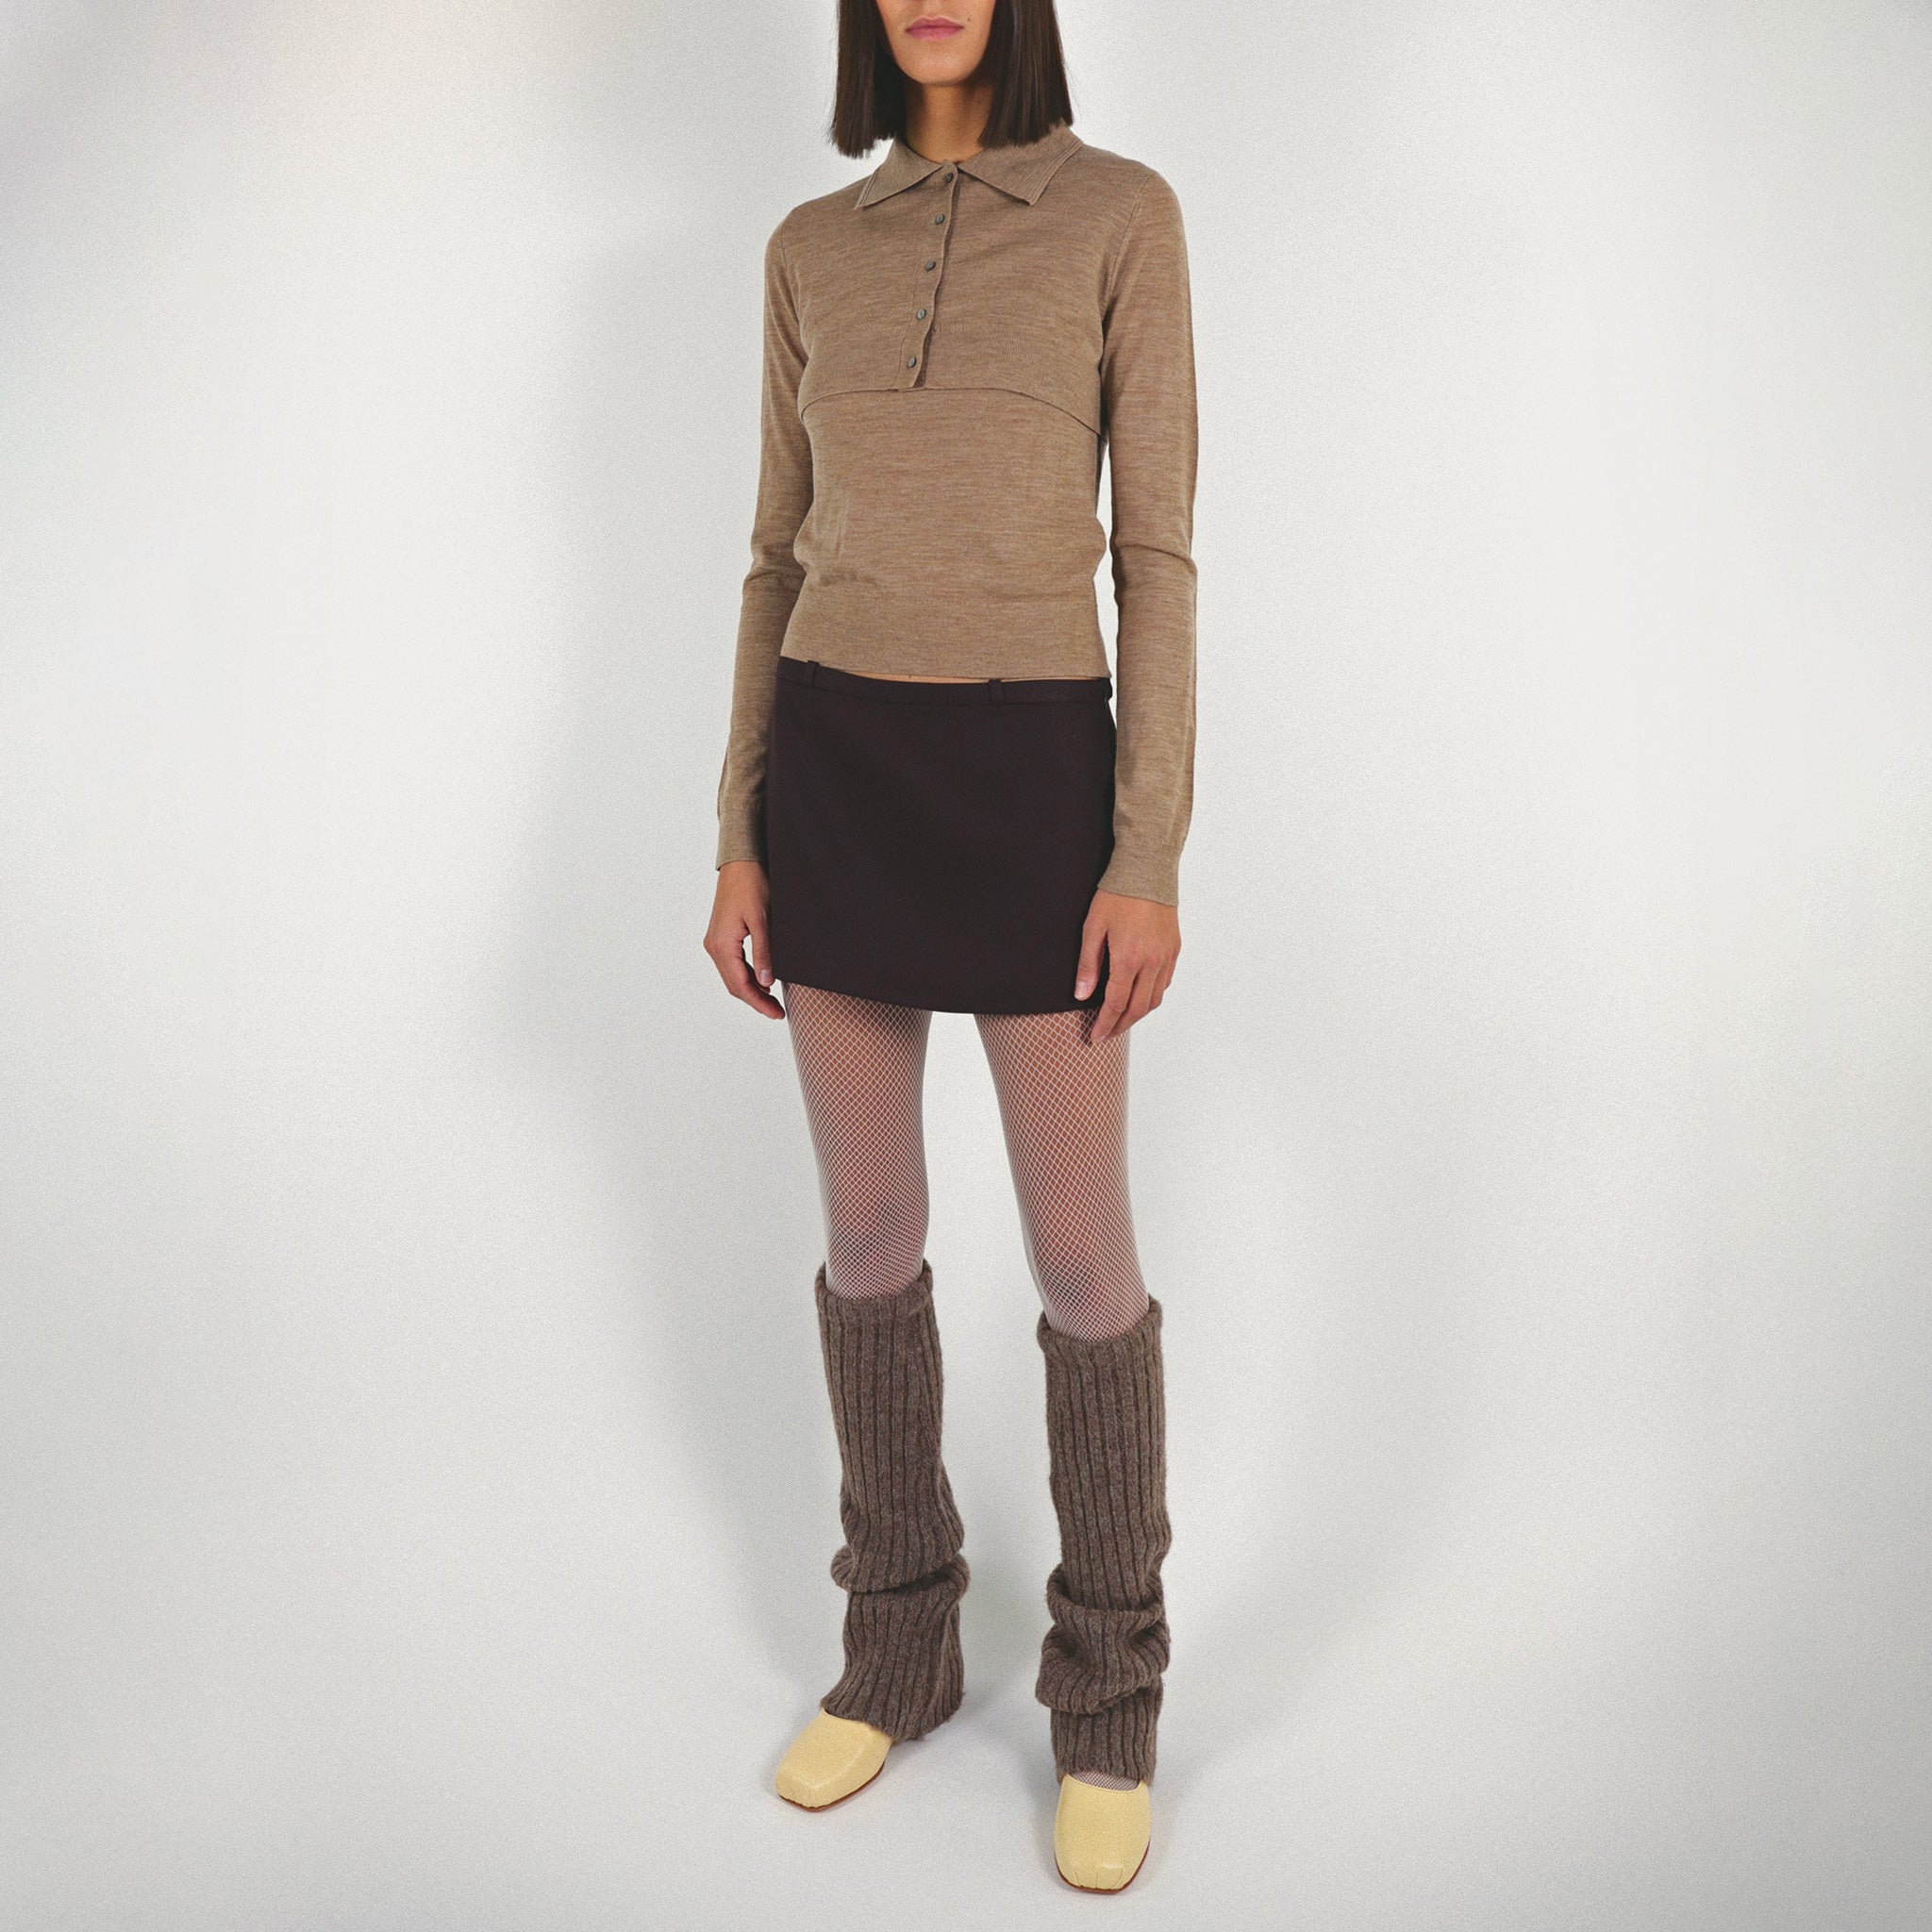 Front full body photo of model wearing the Seek Sweater paired with a dark brown mini skirt and yellow ballet flats.